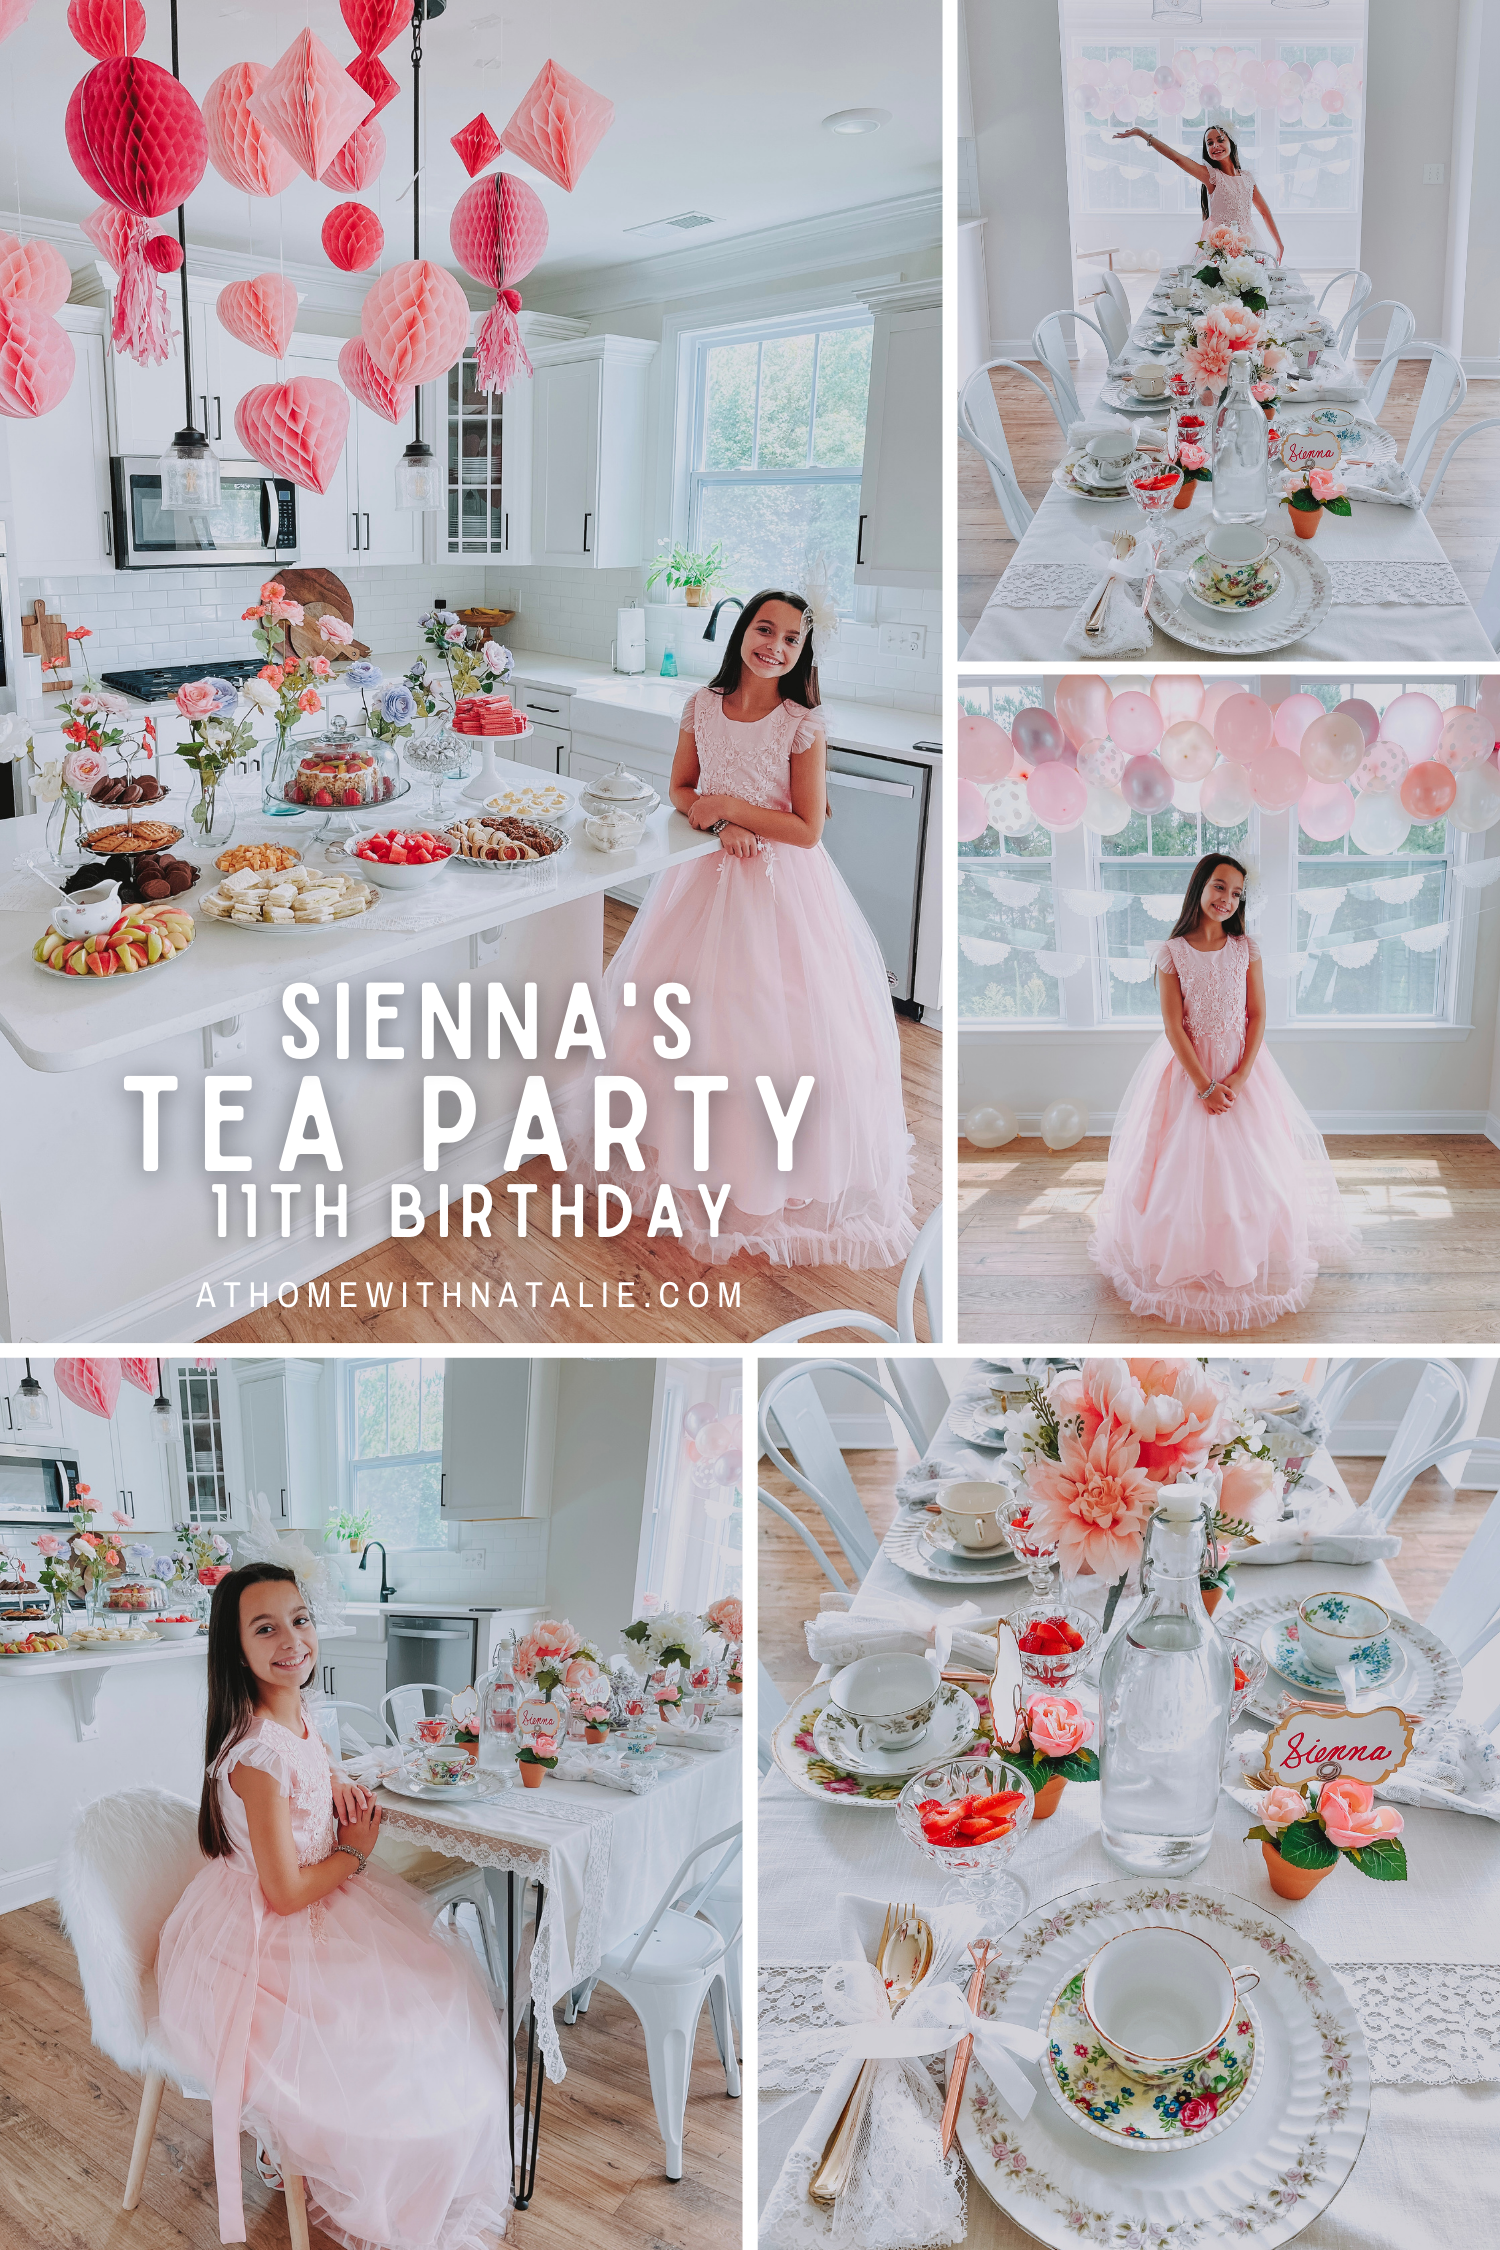 Sienna's Tea Party 11th Birthday! – At Home With Natalie